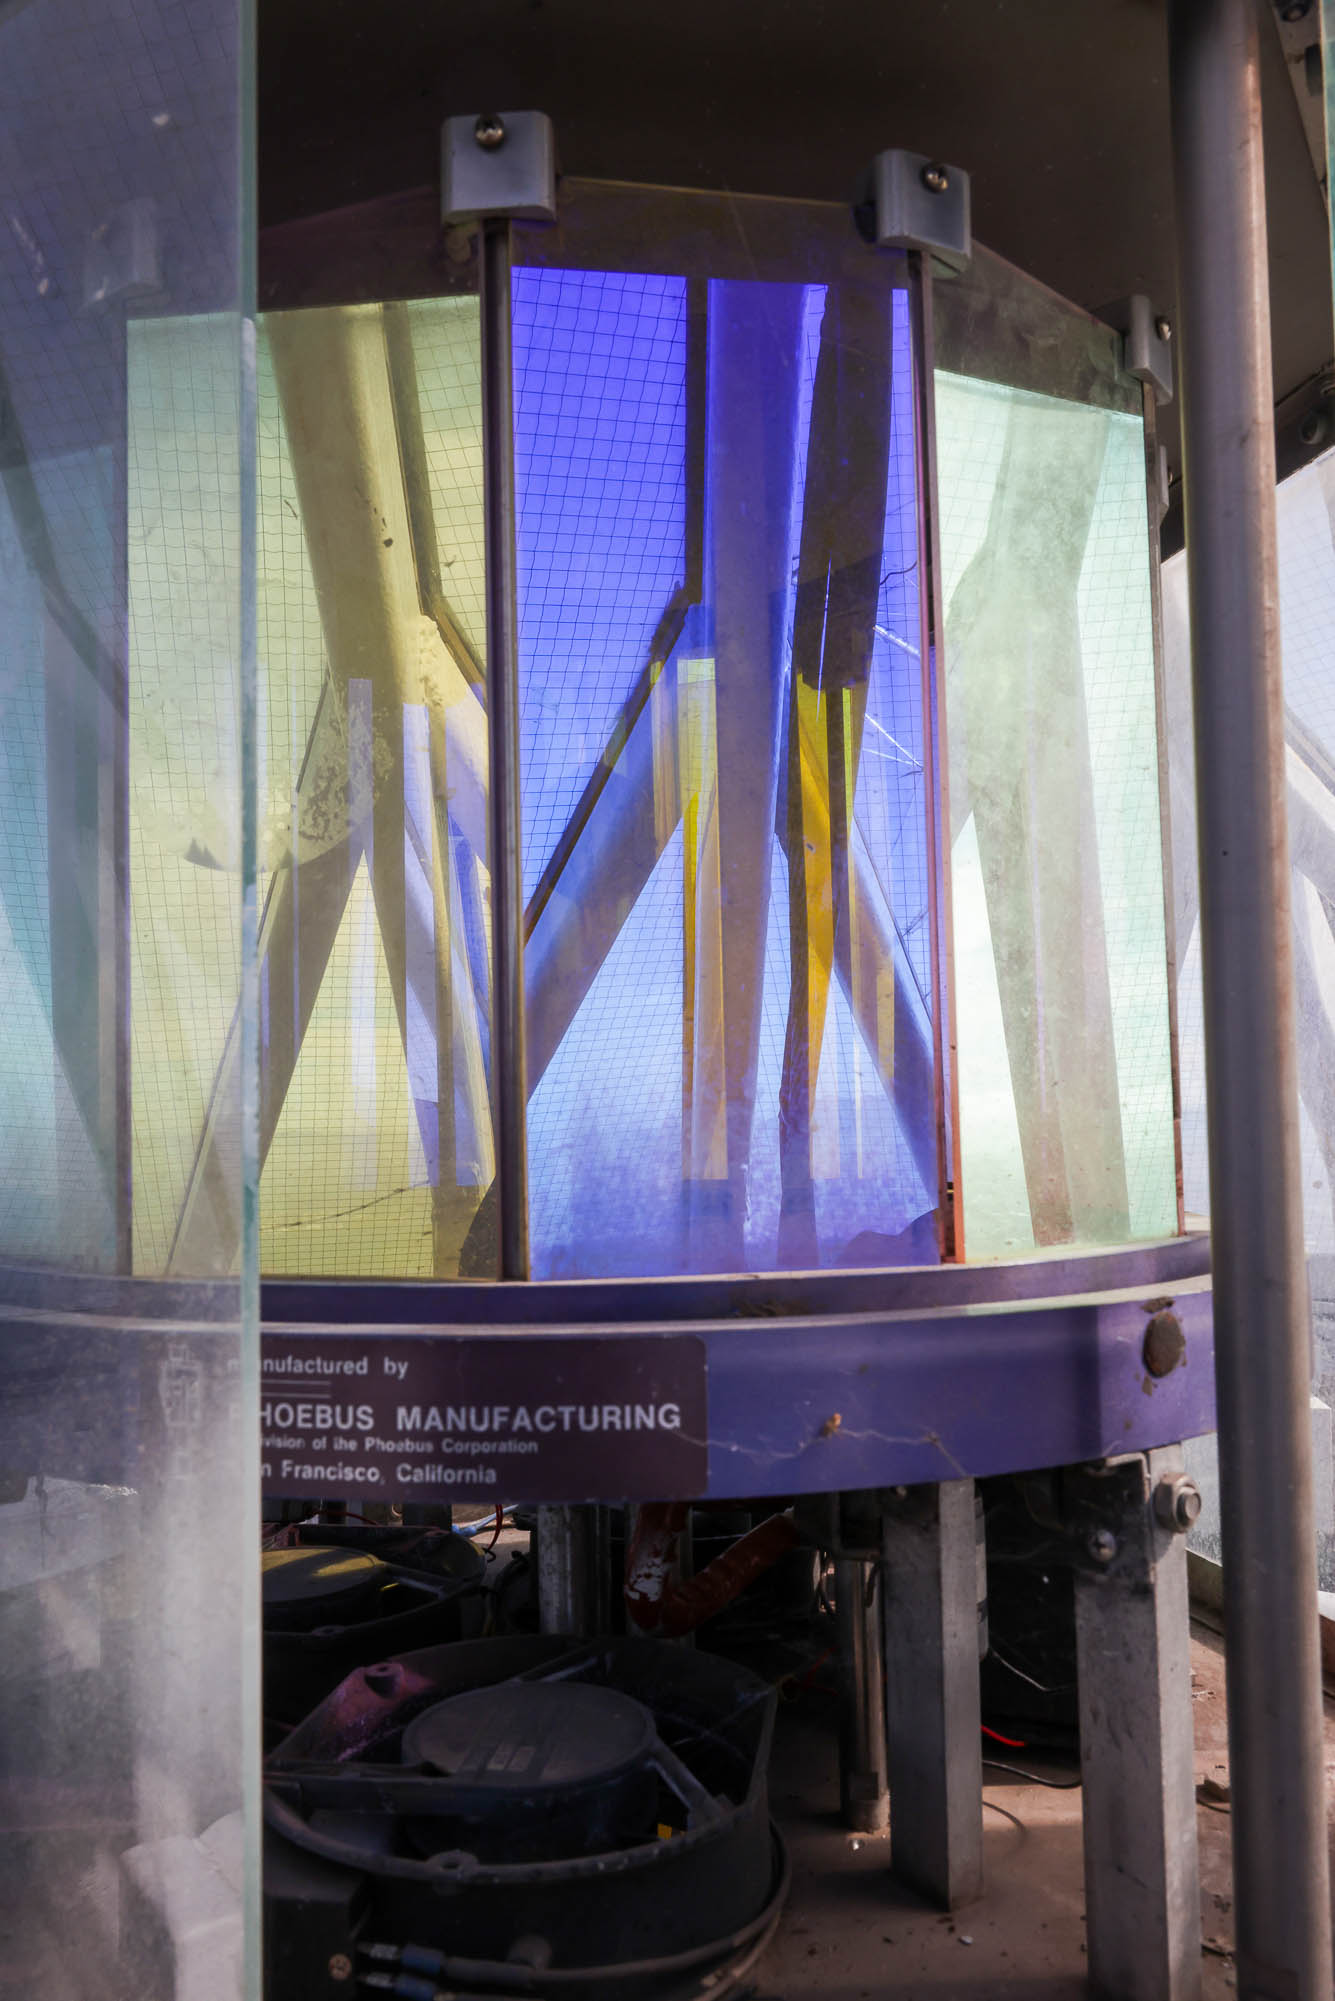 Colorful vertical glass panes within a metal enclosure, with a label &quot;PHOEBUS MANUFACTURING.&quot;